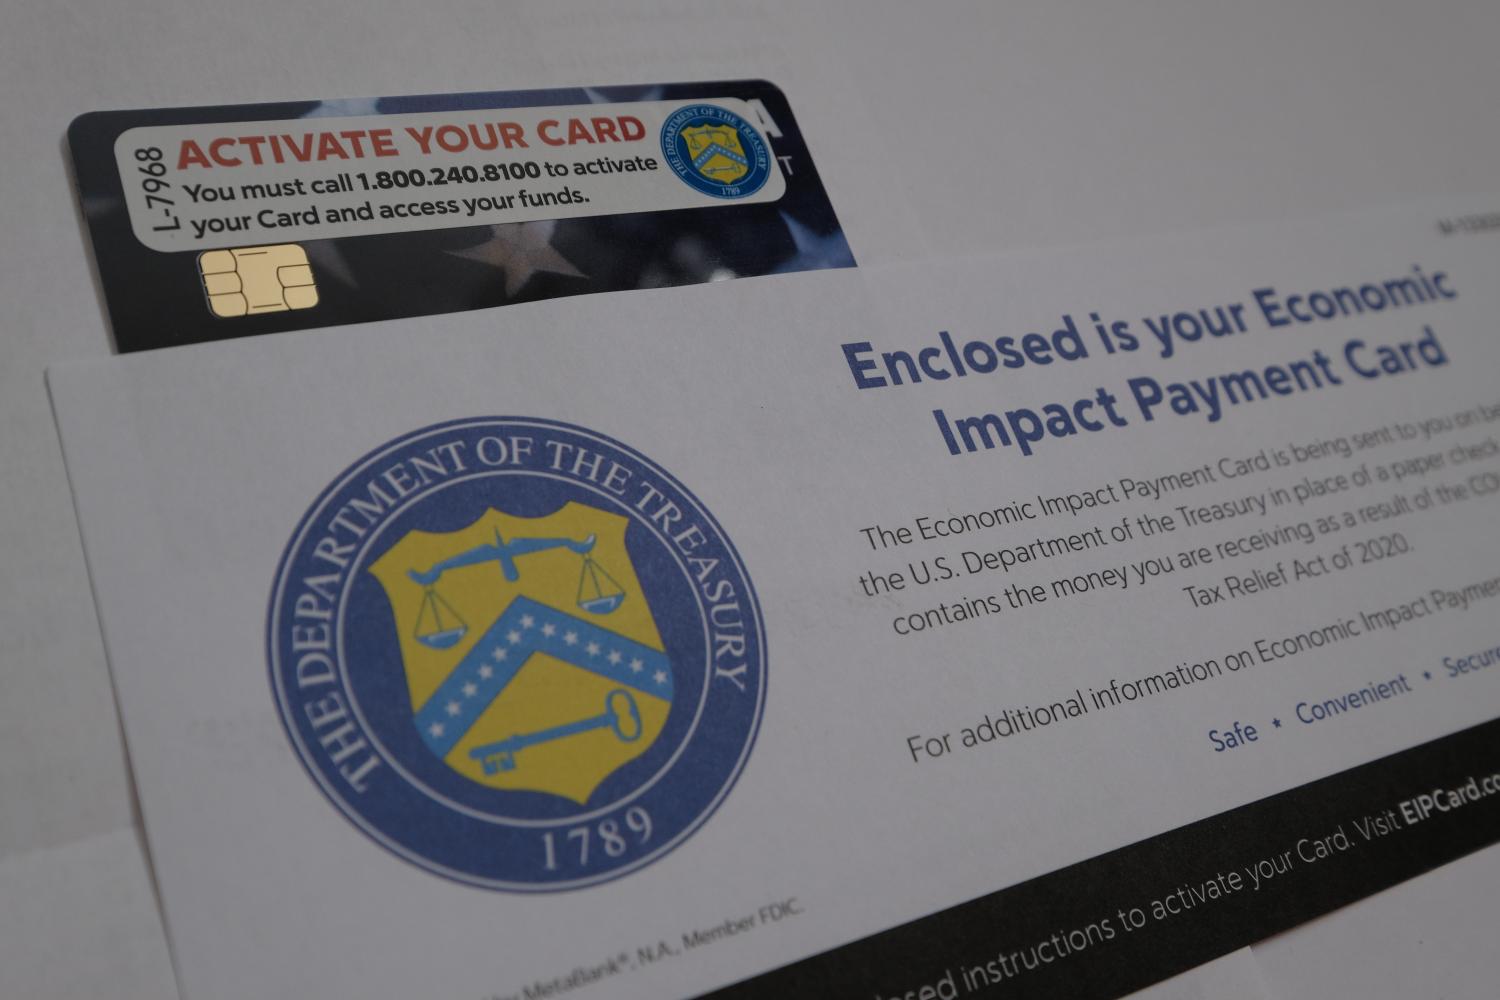 An Economic Impact Payment Card sent on behalf of the U.S. Department of the Treasury in place of a paper check for money received as a result of the COVID-related Tax Relief Act of 2020 pictured in Portland, Ore., on January 25, 2021. (Photo by Alex Milan Tracy/Sipa USA)No Use Germany.